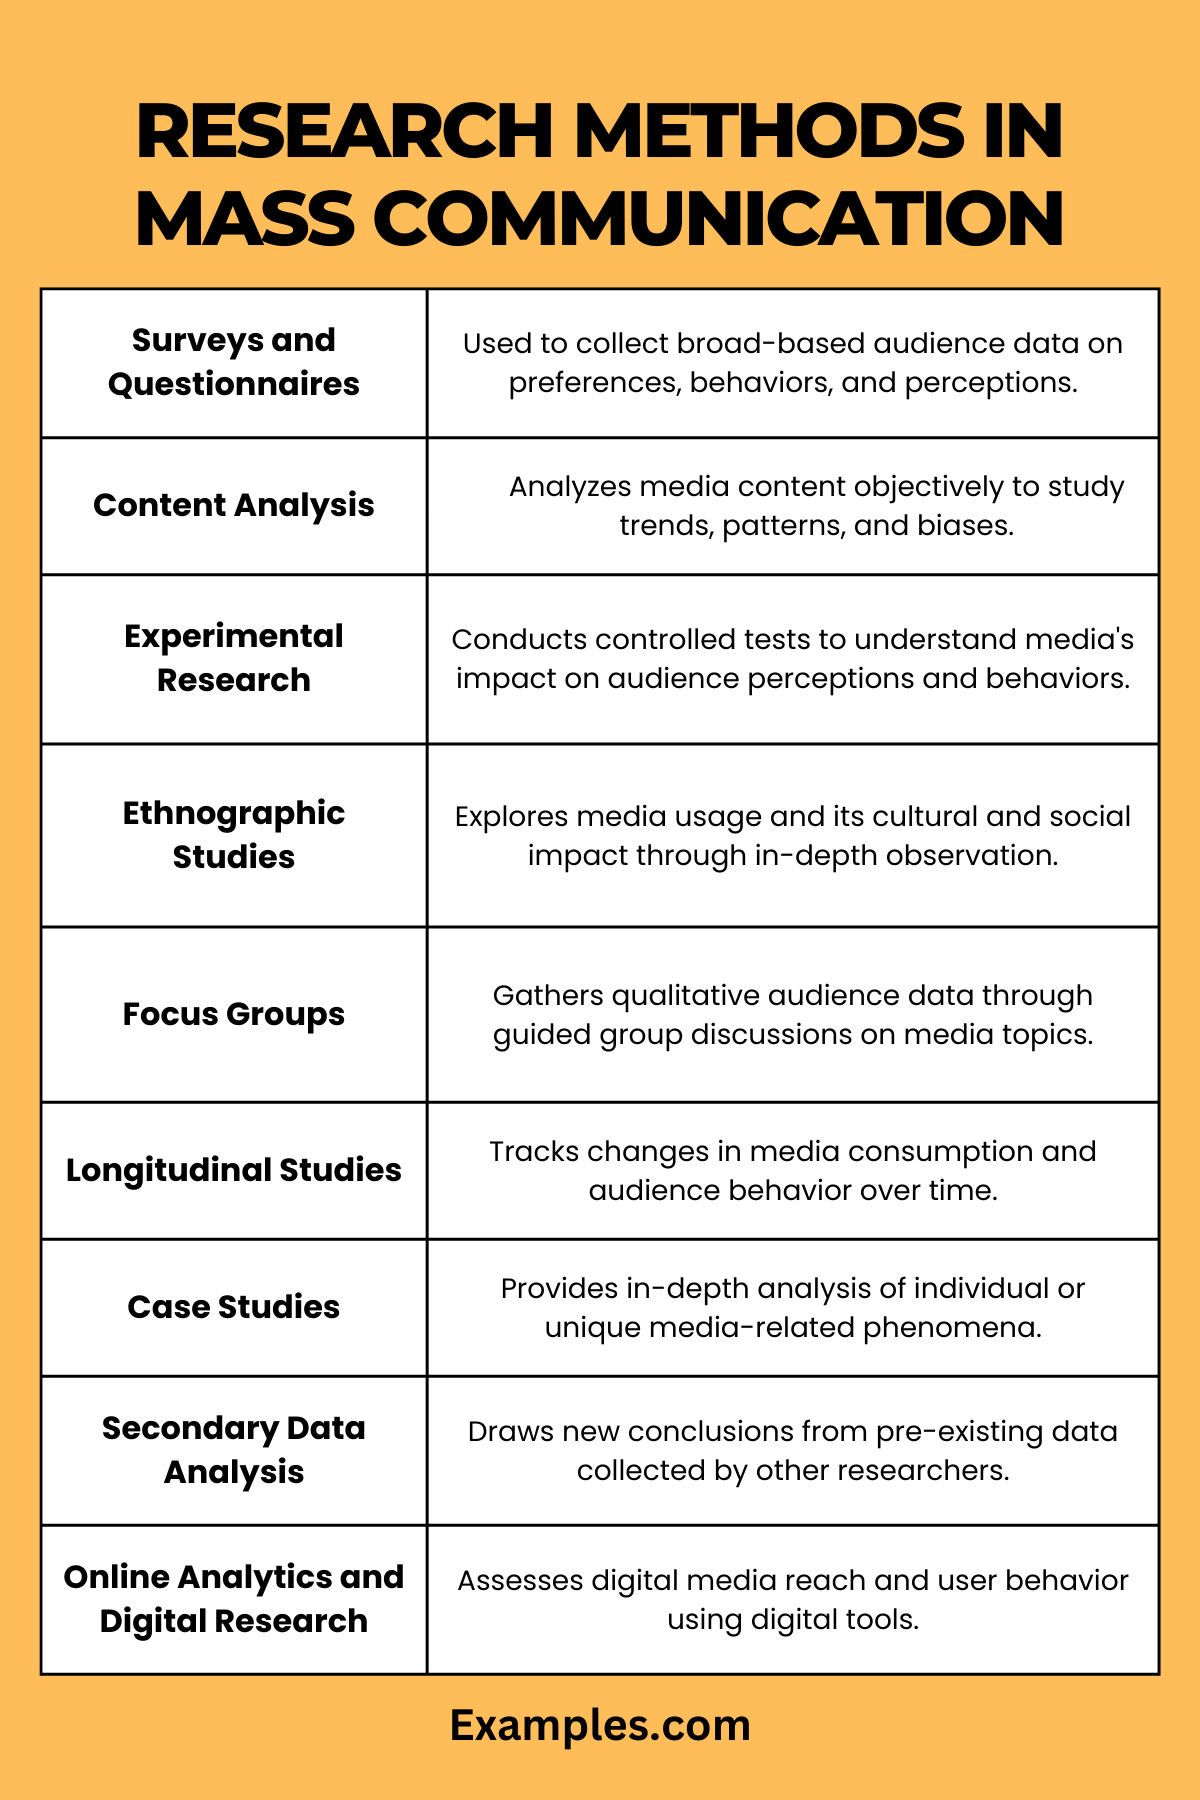 types of research methods in mass communicationof mass communication